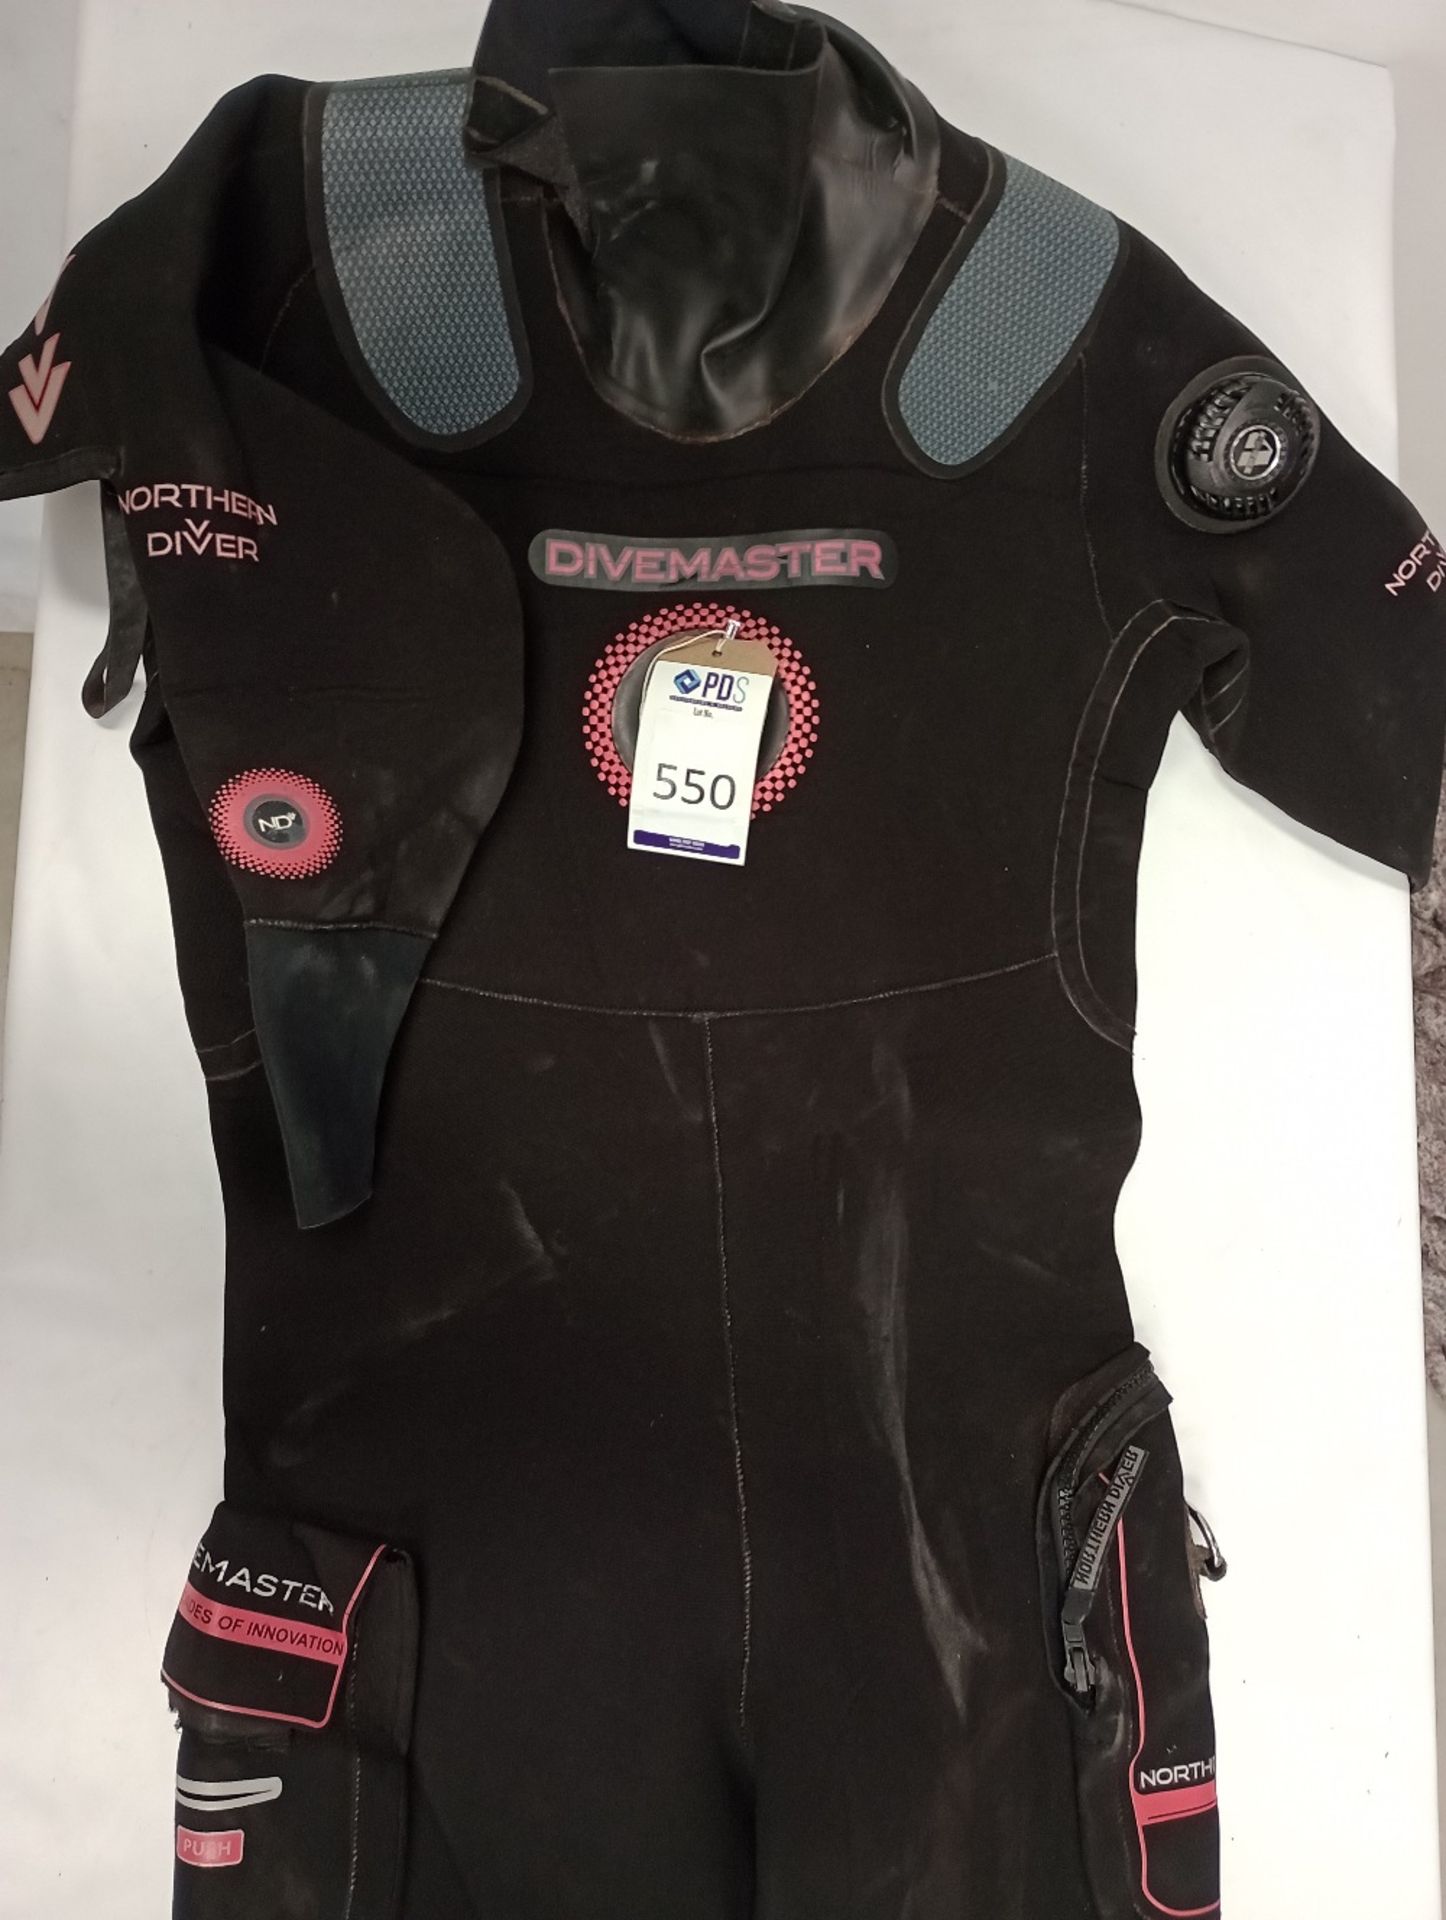 Northern Diver Divemaster, Size Medium R (Gents), Boot 8 (Location: Brentwood. Please Refer to - Image 2 of 4